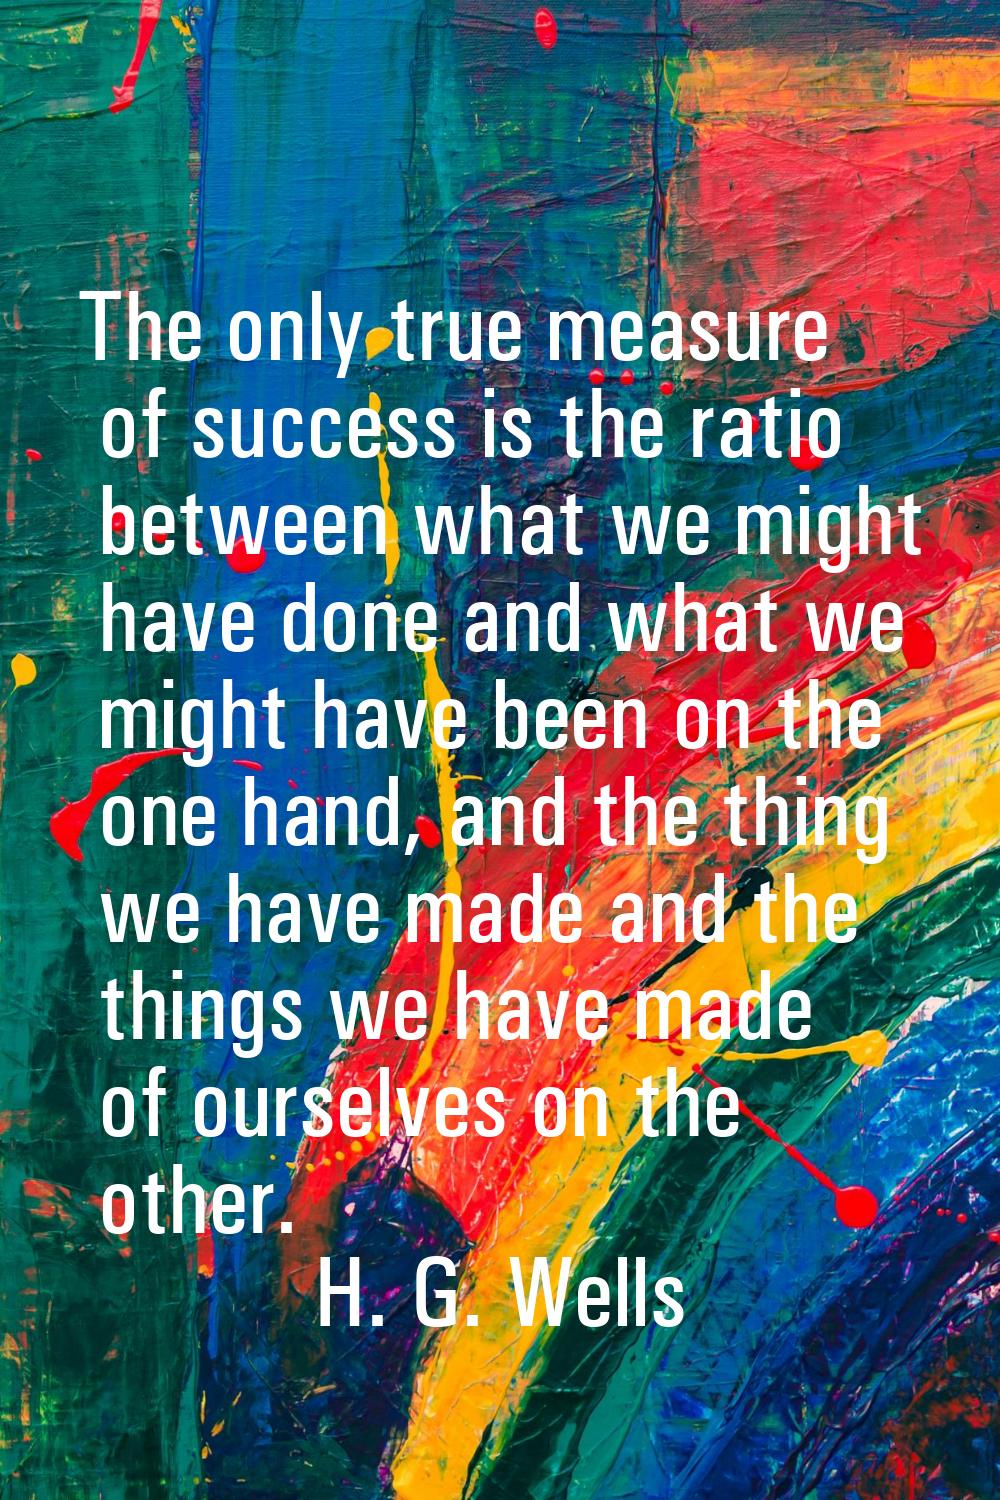 The only true measure of success is the ratio between what we might have done and what we might hav